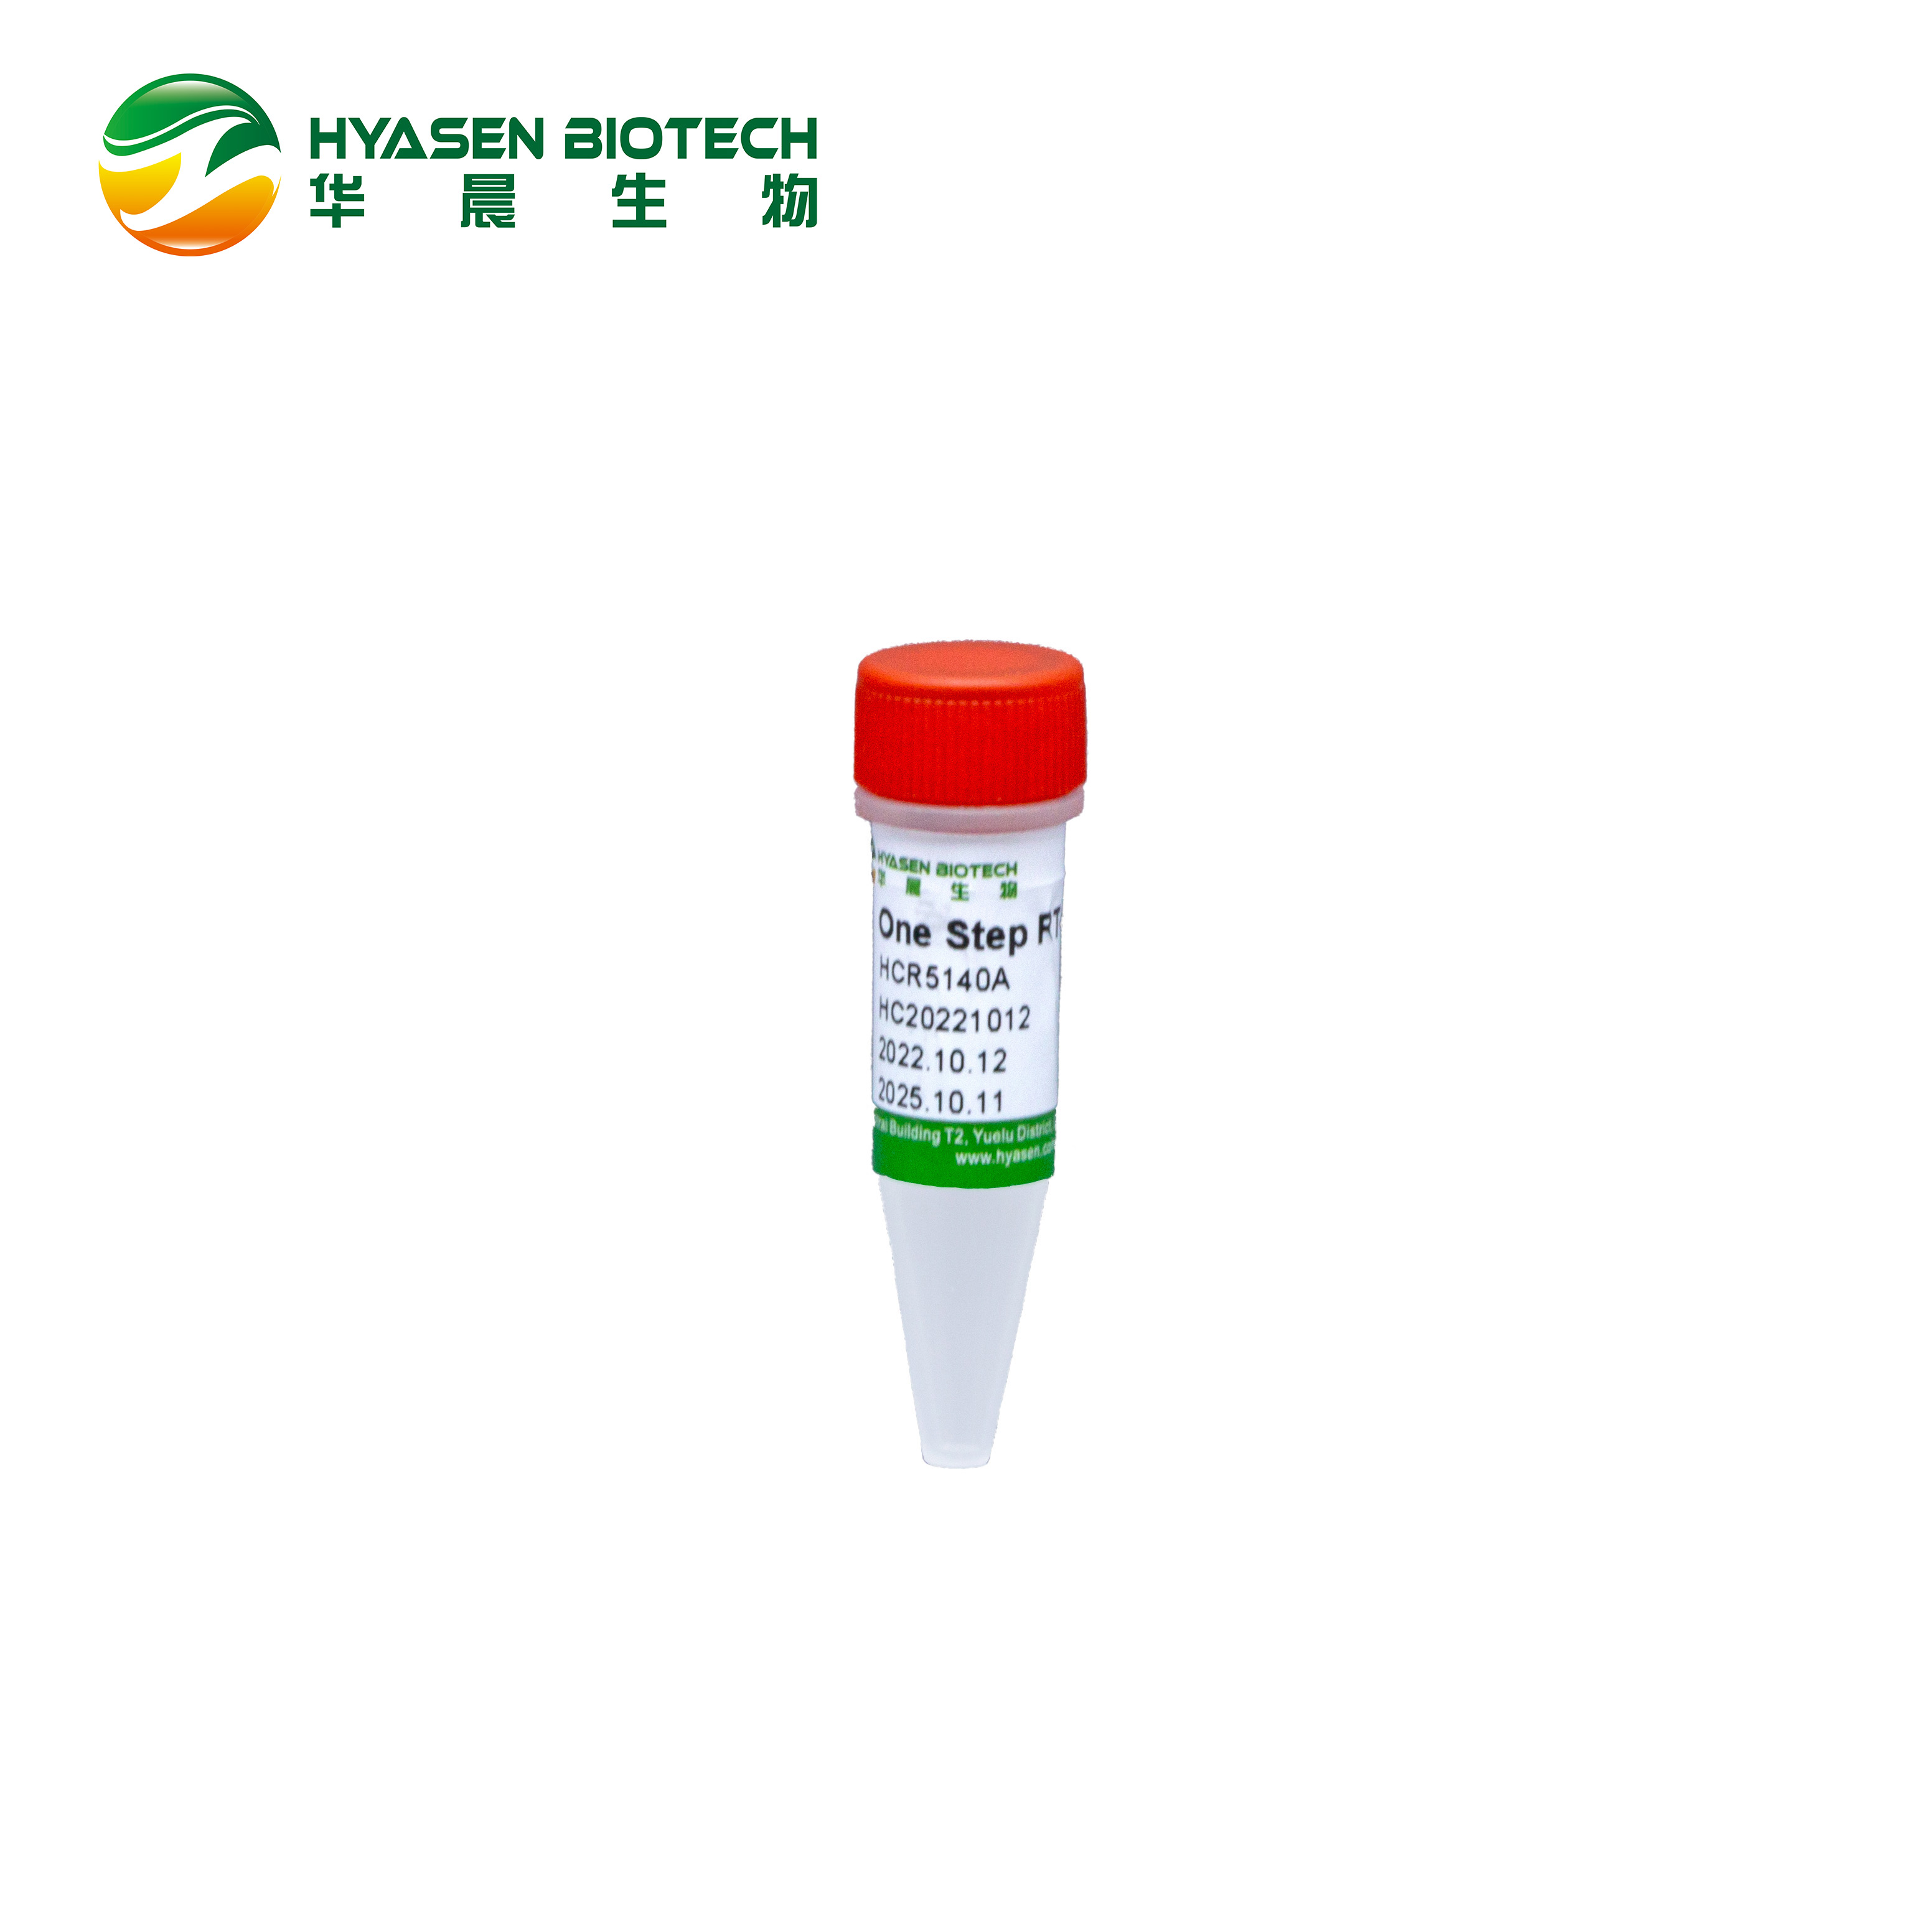 One Step RT-qPCR SYBR Green Premix HCB5140A Featured Image